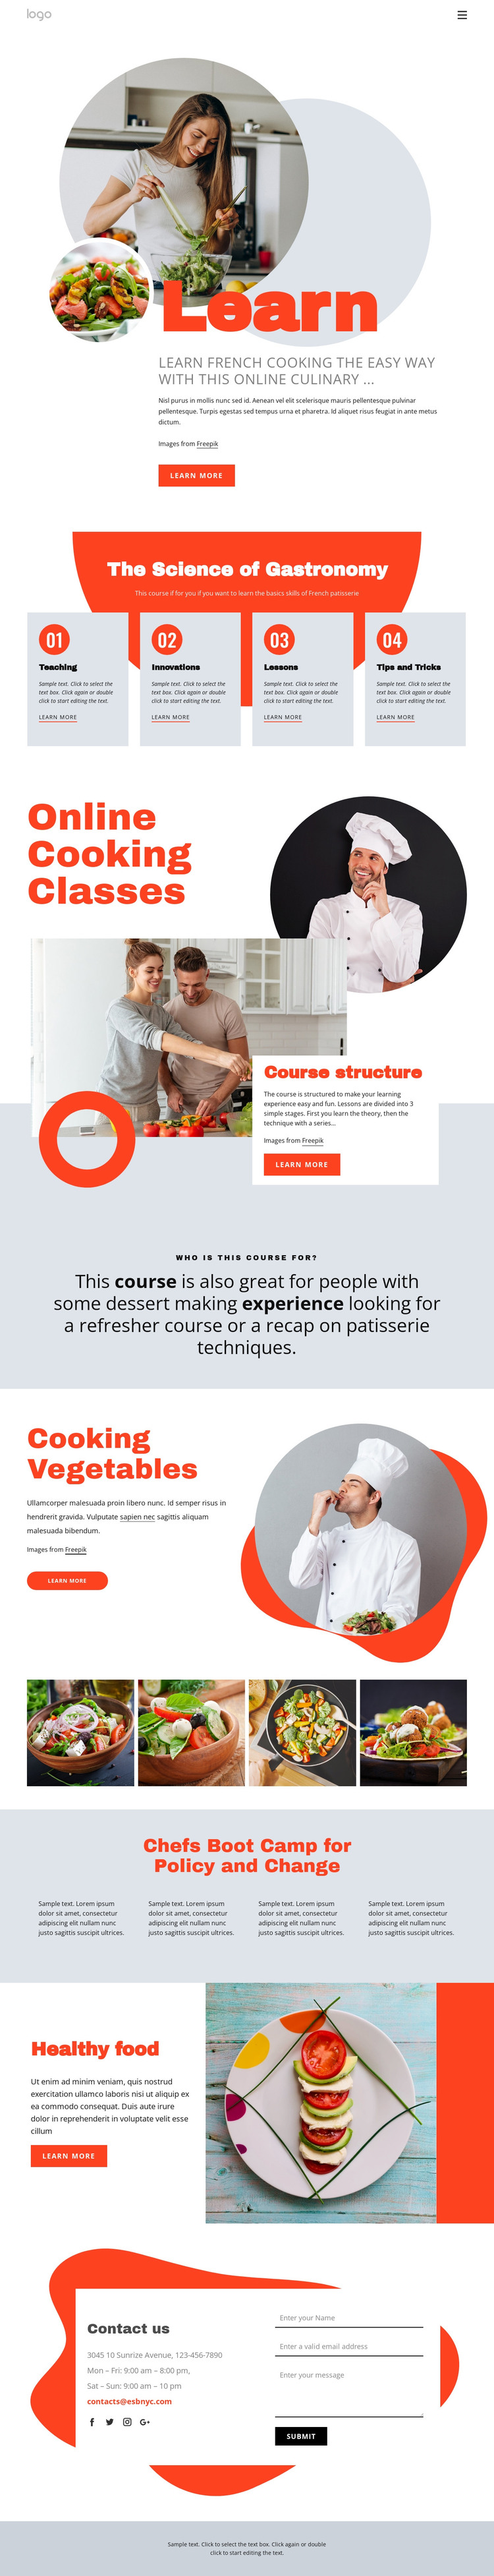 Learn cooking the easy way Web Design